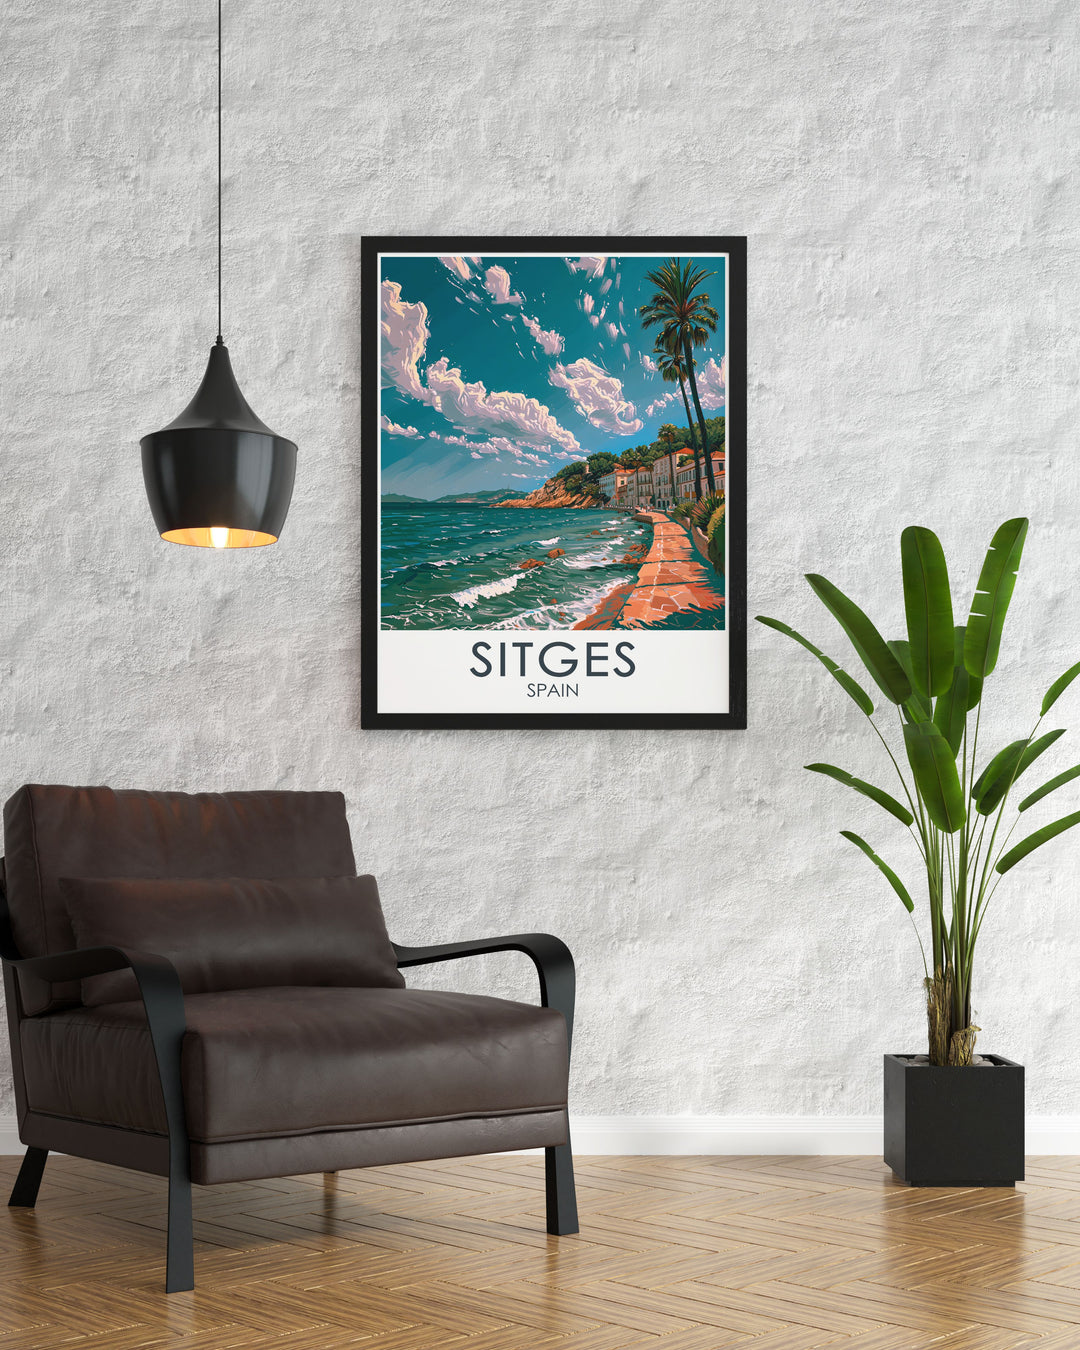 Featuring the serene Promenade of Sitges, this poster showcases the tranquil and inviting atmosphere of this coastal town, perfect for anyone seeking a relaxing Mediterranean retreat.